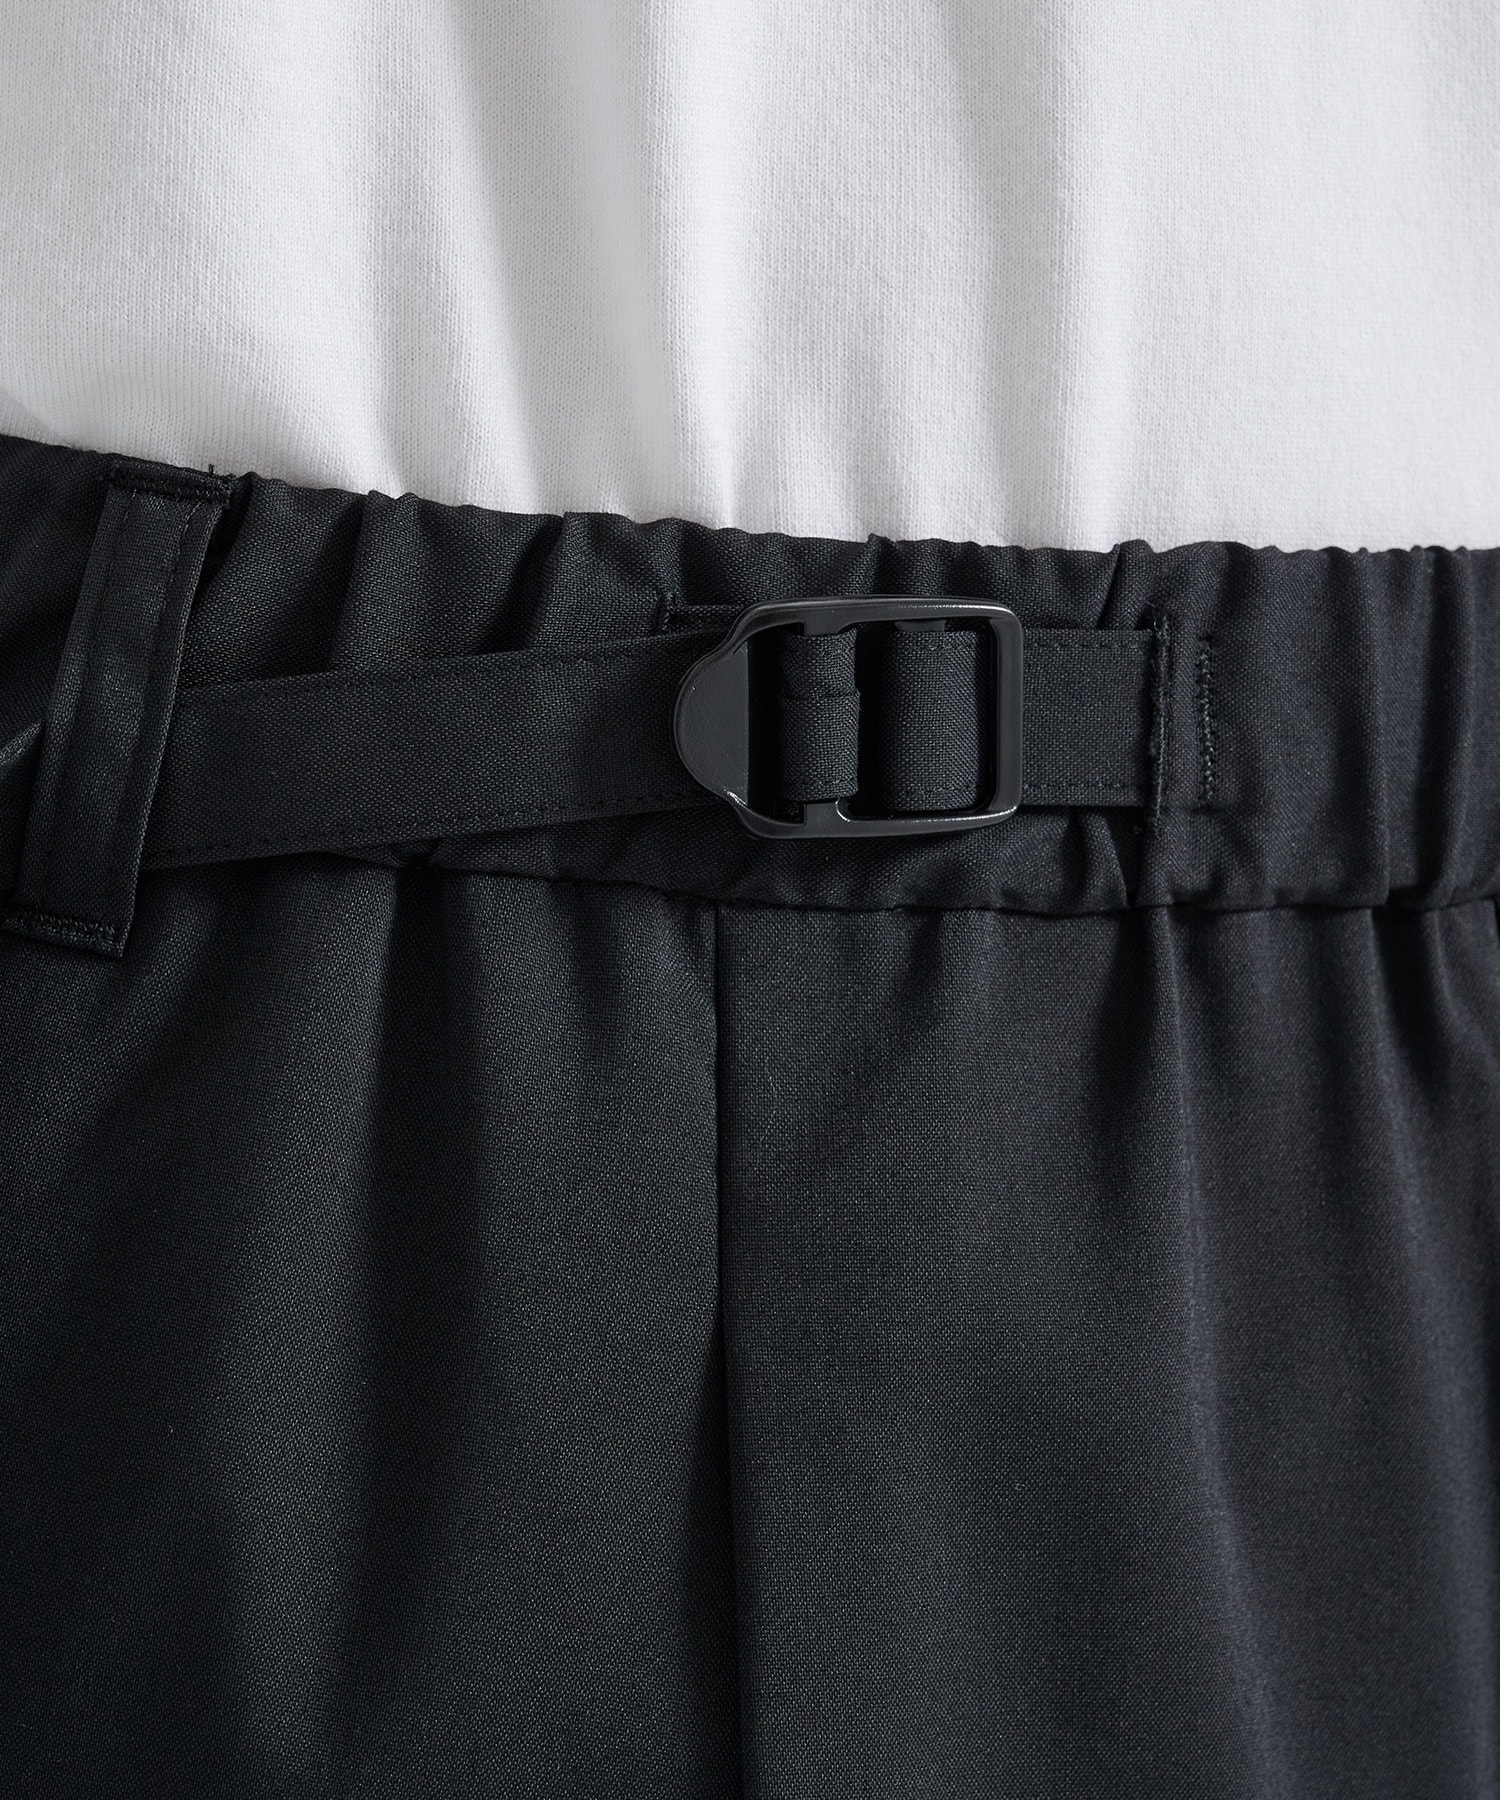 1TUCK BELTED PANTS White Mountaineering